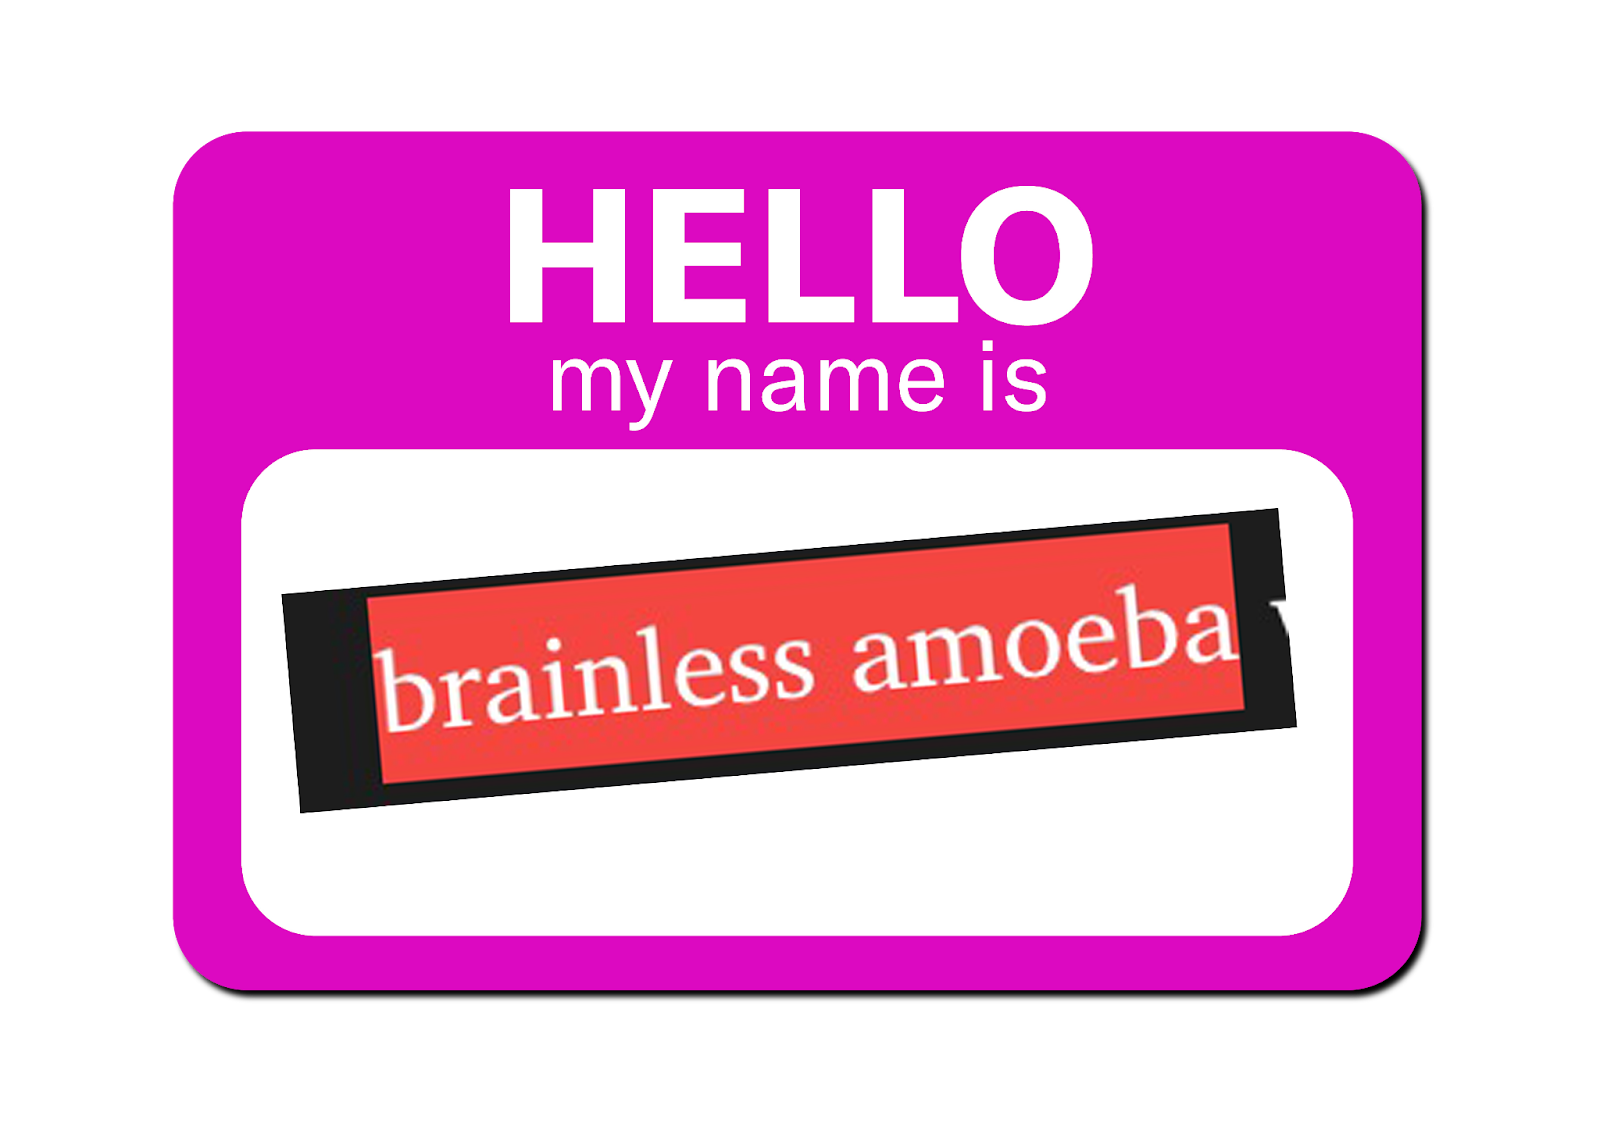 Clipart of one of those HELLO MY NAME IS sticker-badges  you are supposed to wear for awkward social/business interactions and I put a chunk of a screenshot of a thing I was reading about a "brainless amoeba," so the visual effect is a name badge that reads "HELLO MY NAME IS BRAINLESS AMEOBA."